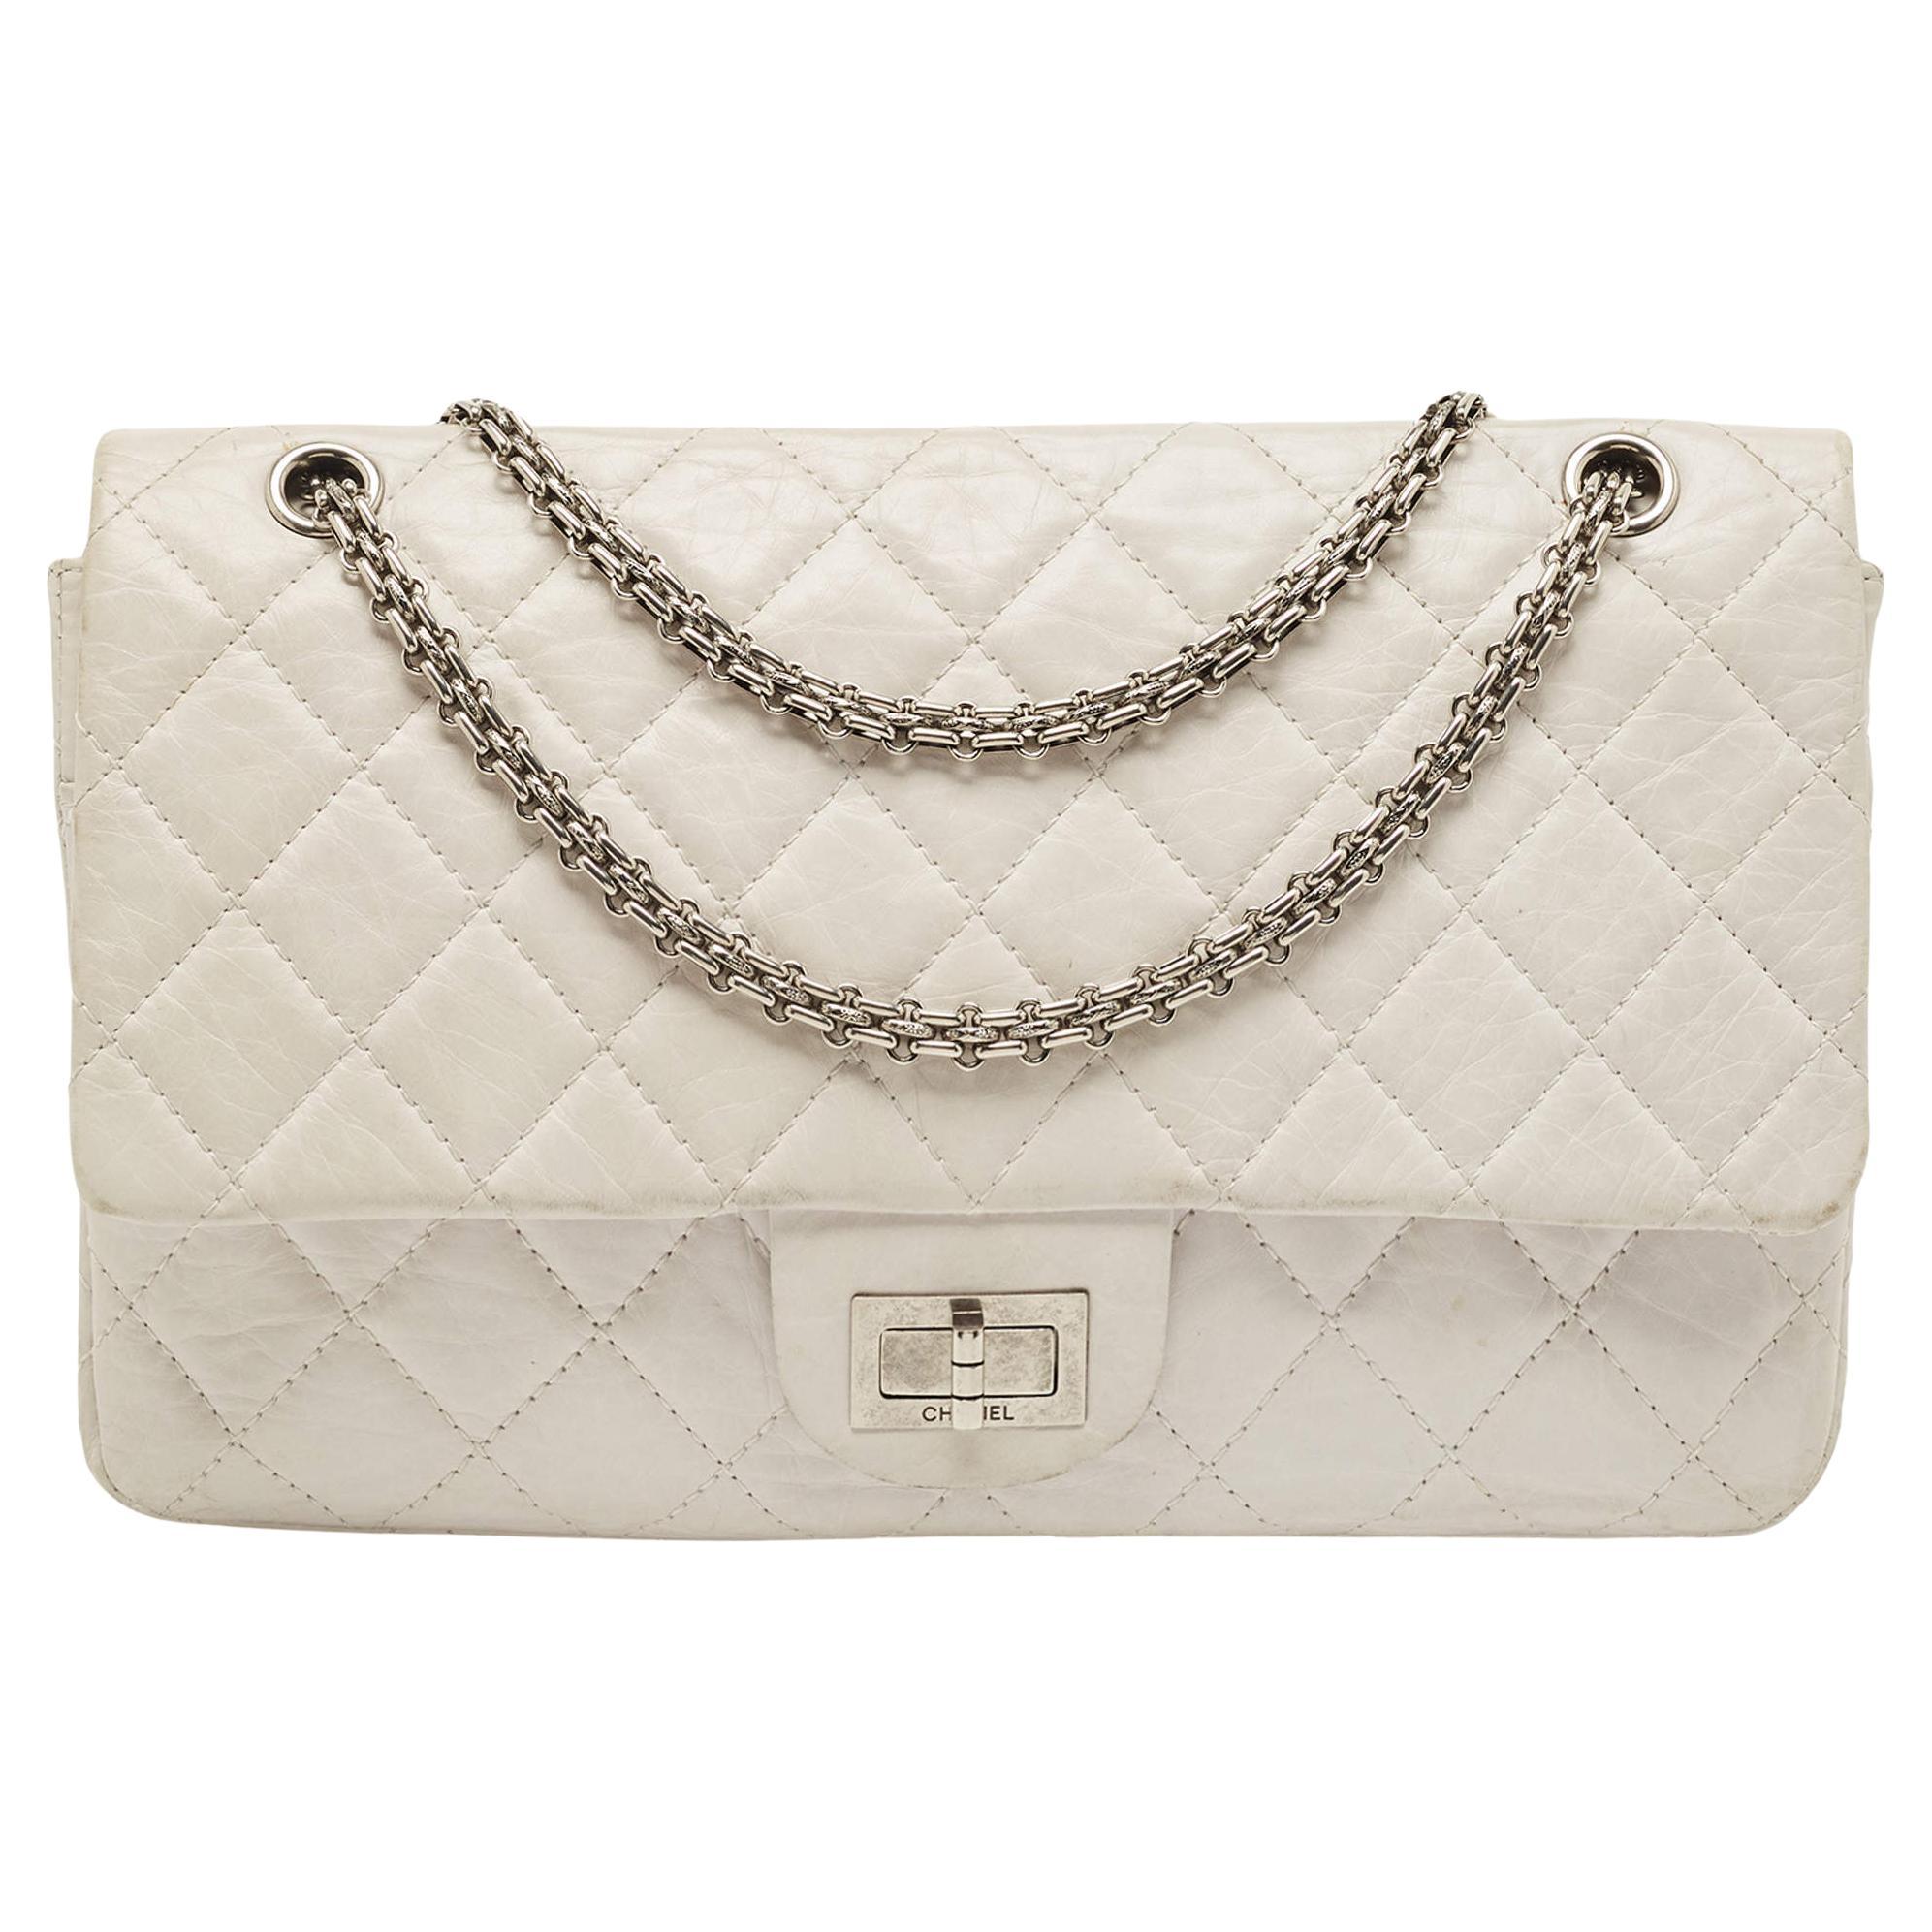 Chanel White Quilted Aged Leather Reissue 2.55 Classic 227 Flap Bag For Sale